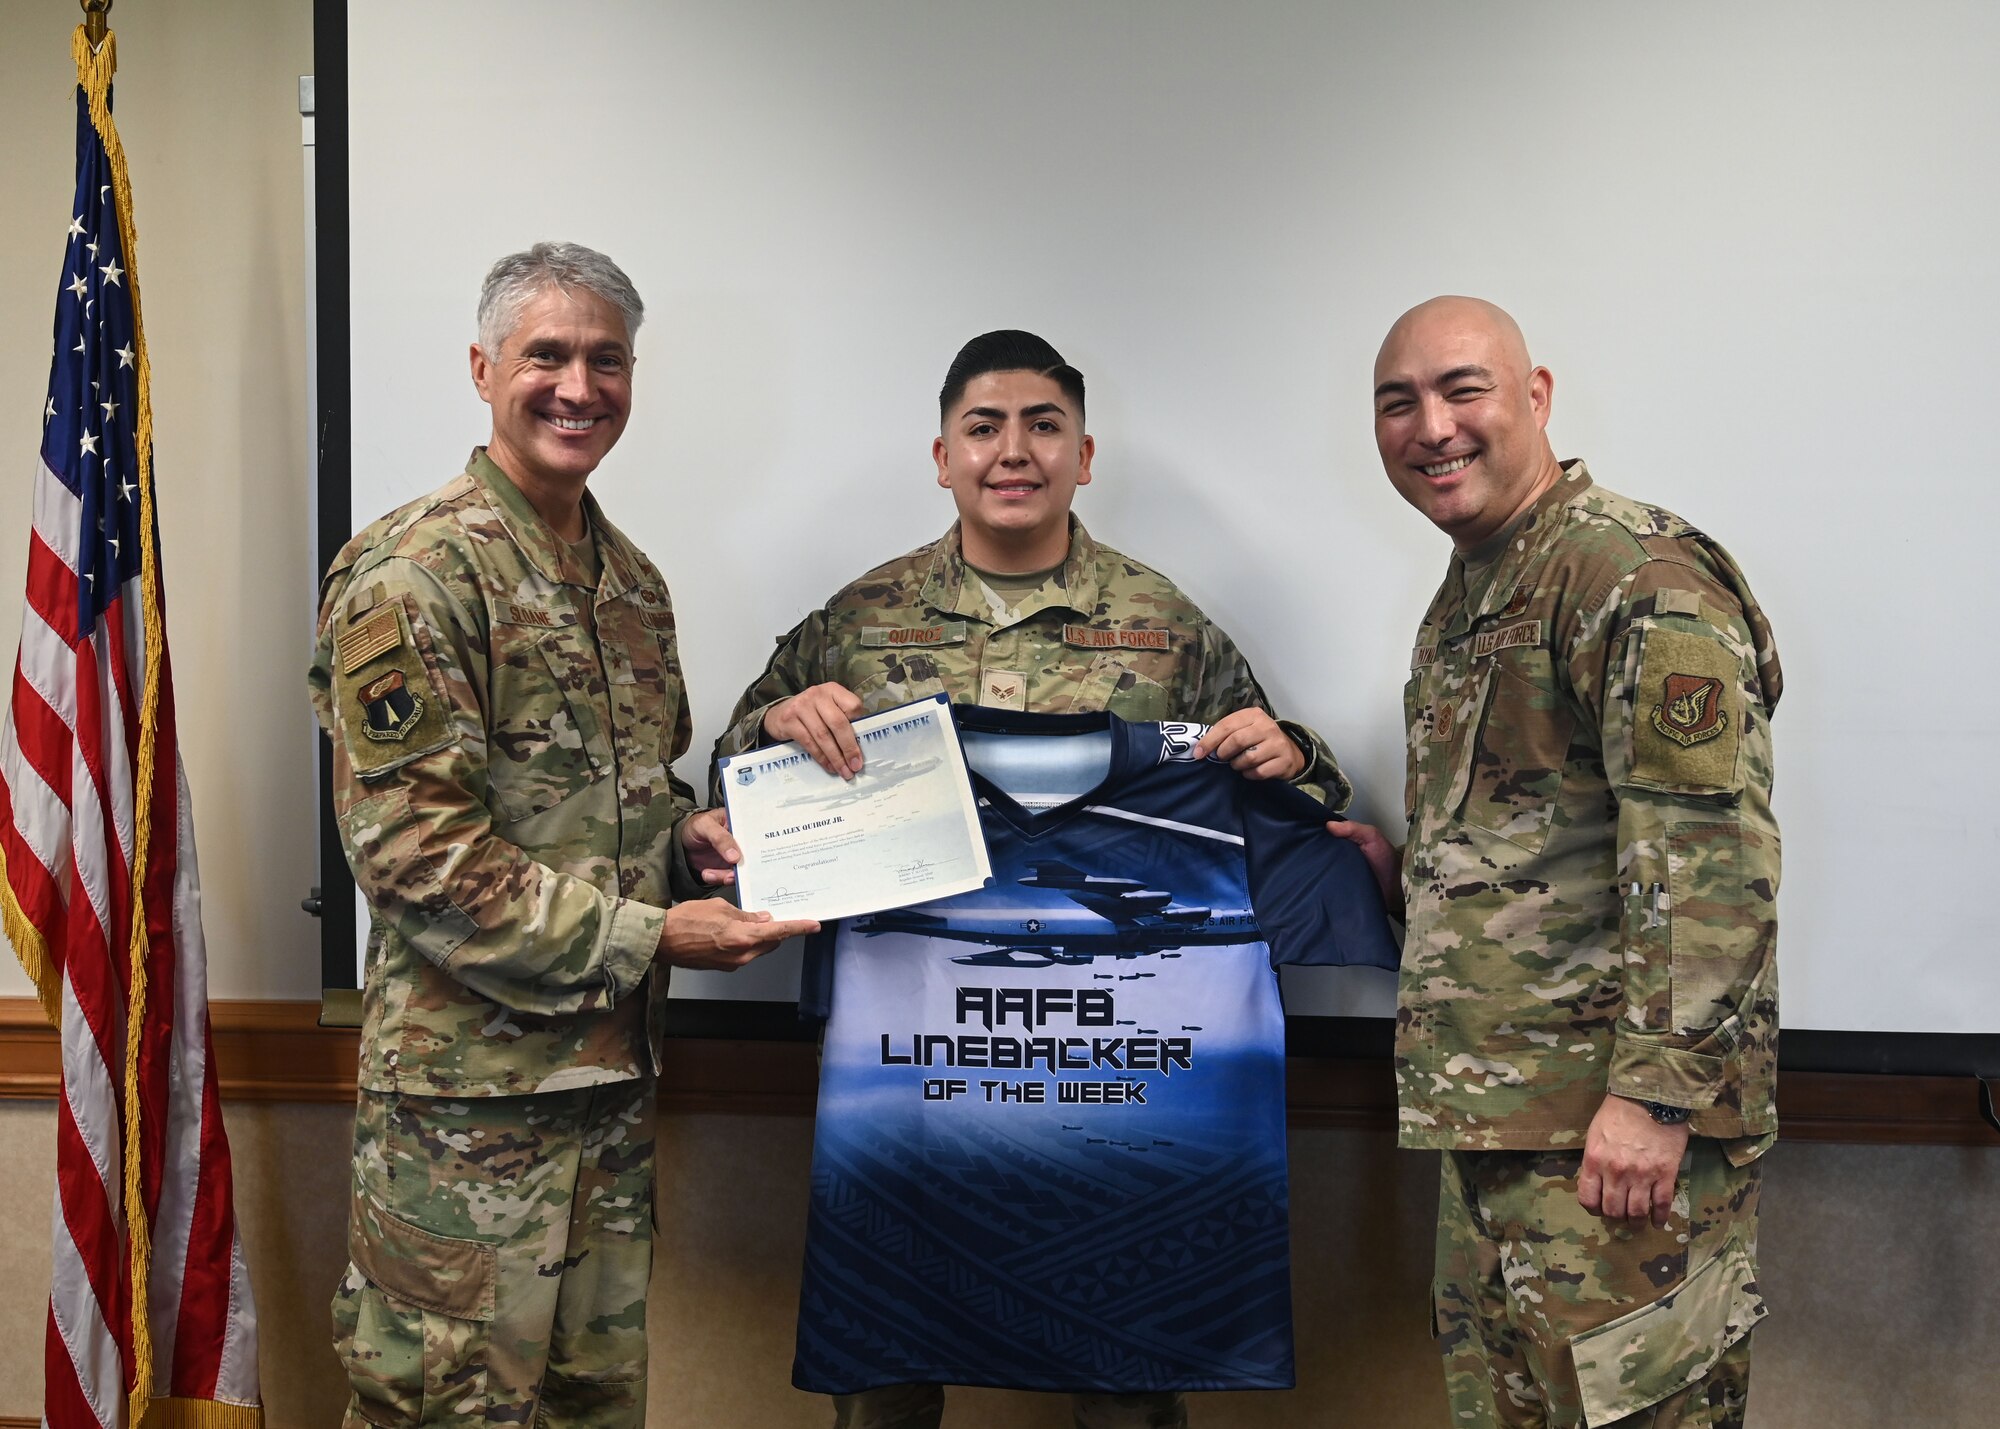 U.S. Air Force Senior Airman Alex Quiroz Jr., a Base Defense Operations Center Controller with the 36th Security Force Squadron, is presented a certificate and jersey from U.S. Air Force Brig. Gen. Jeremy Sloane, 36th Wing commander, and U.S. Air Force Chief Master Sgt. John Payne, 36th Wing command chief, for the Linebacker of the Week award at Andersen Air Force Base, Guam, April 13, 2022.